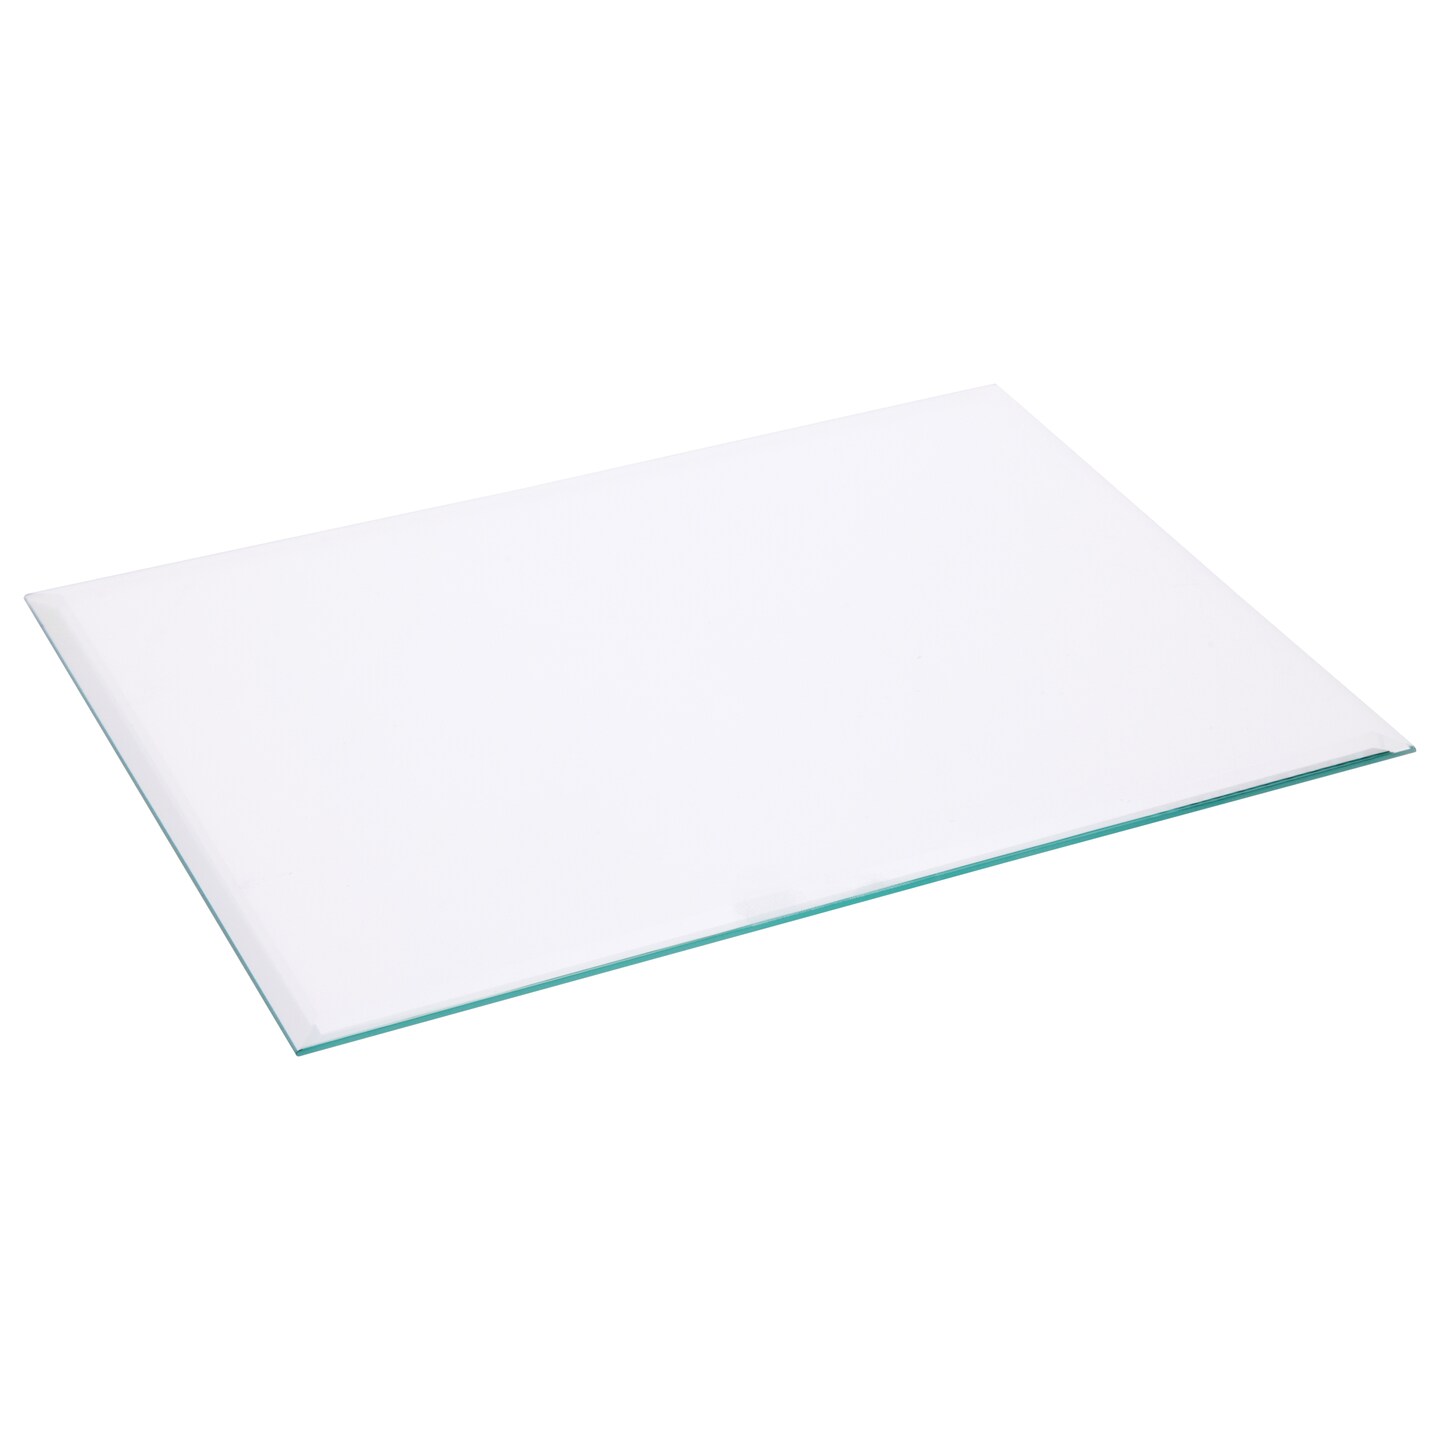 Plymor Rectangle 3mm Beveled Clear Glass, 6 inch x 8 inch